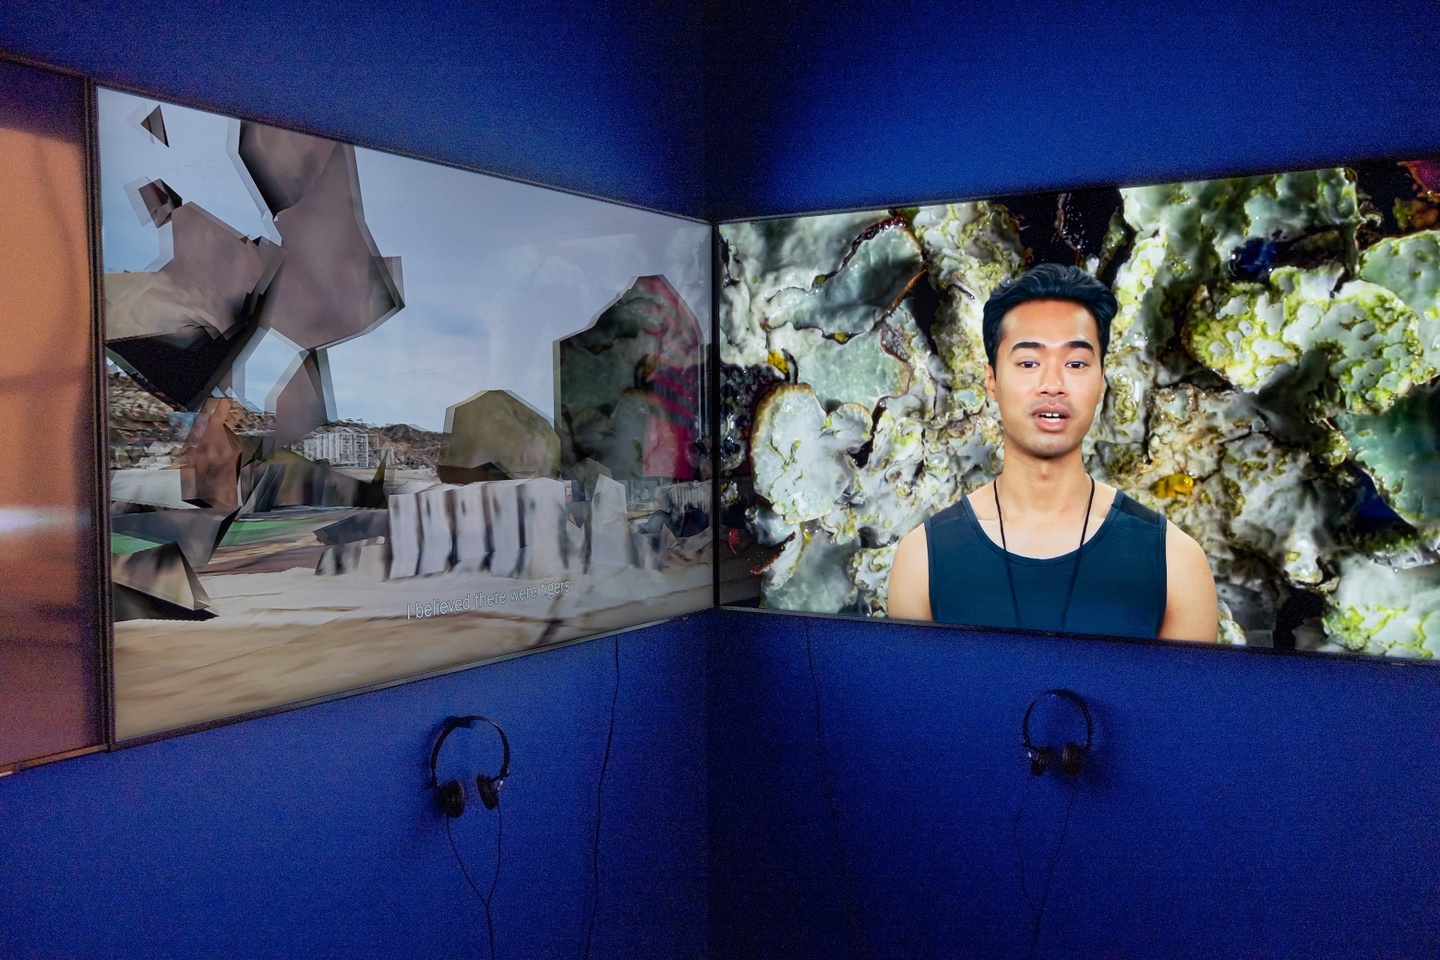 Two large screen monitors mounted on a blue wall with headphones hanging underneath. Images of a building and a person talking are on the screens.